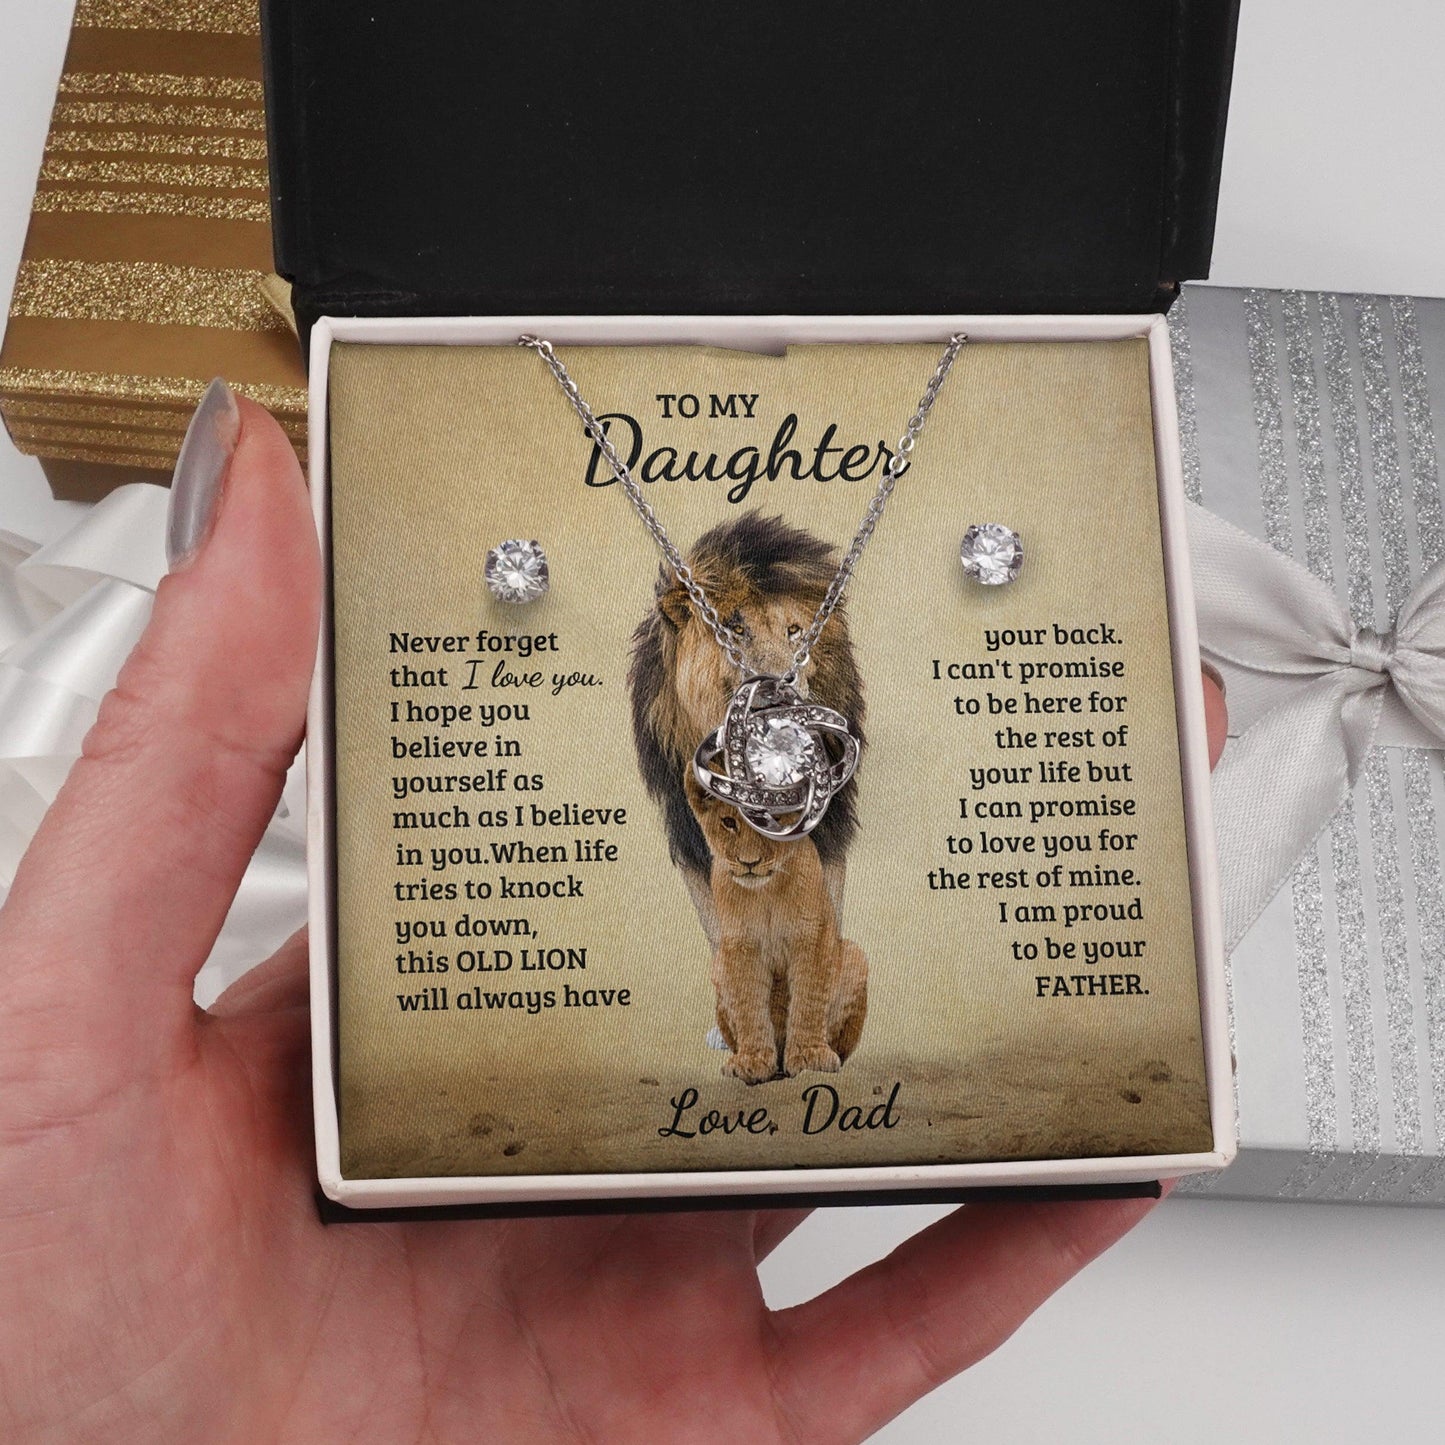 Jewelry gifts Daughter - Proud Of You - LK Gift Set - Belesmé - Memorable Jewelry Gifts